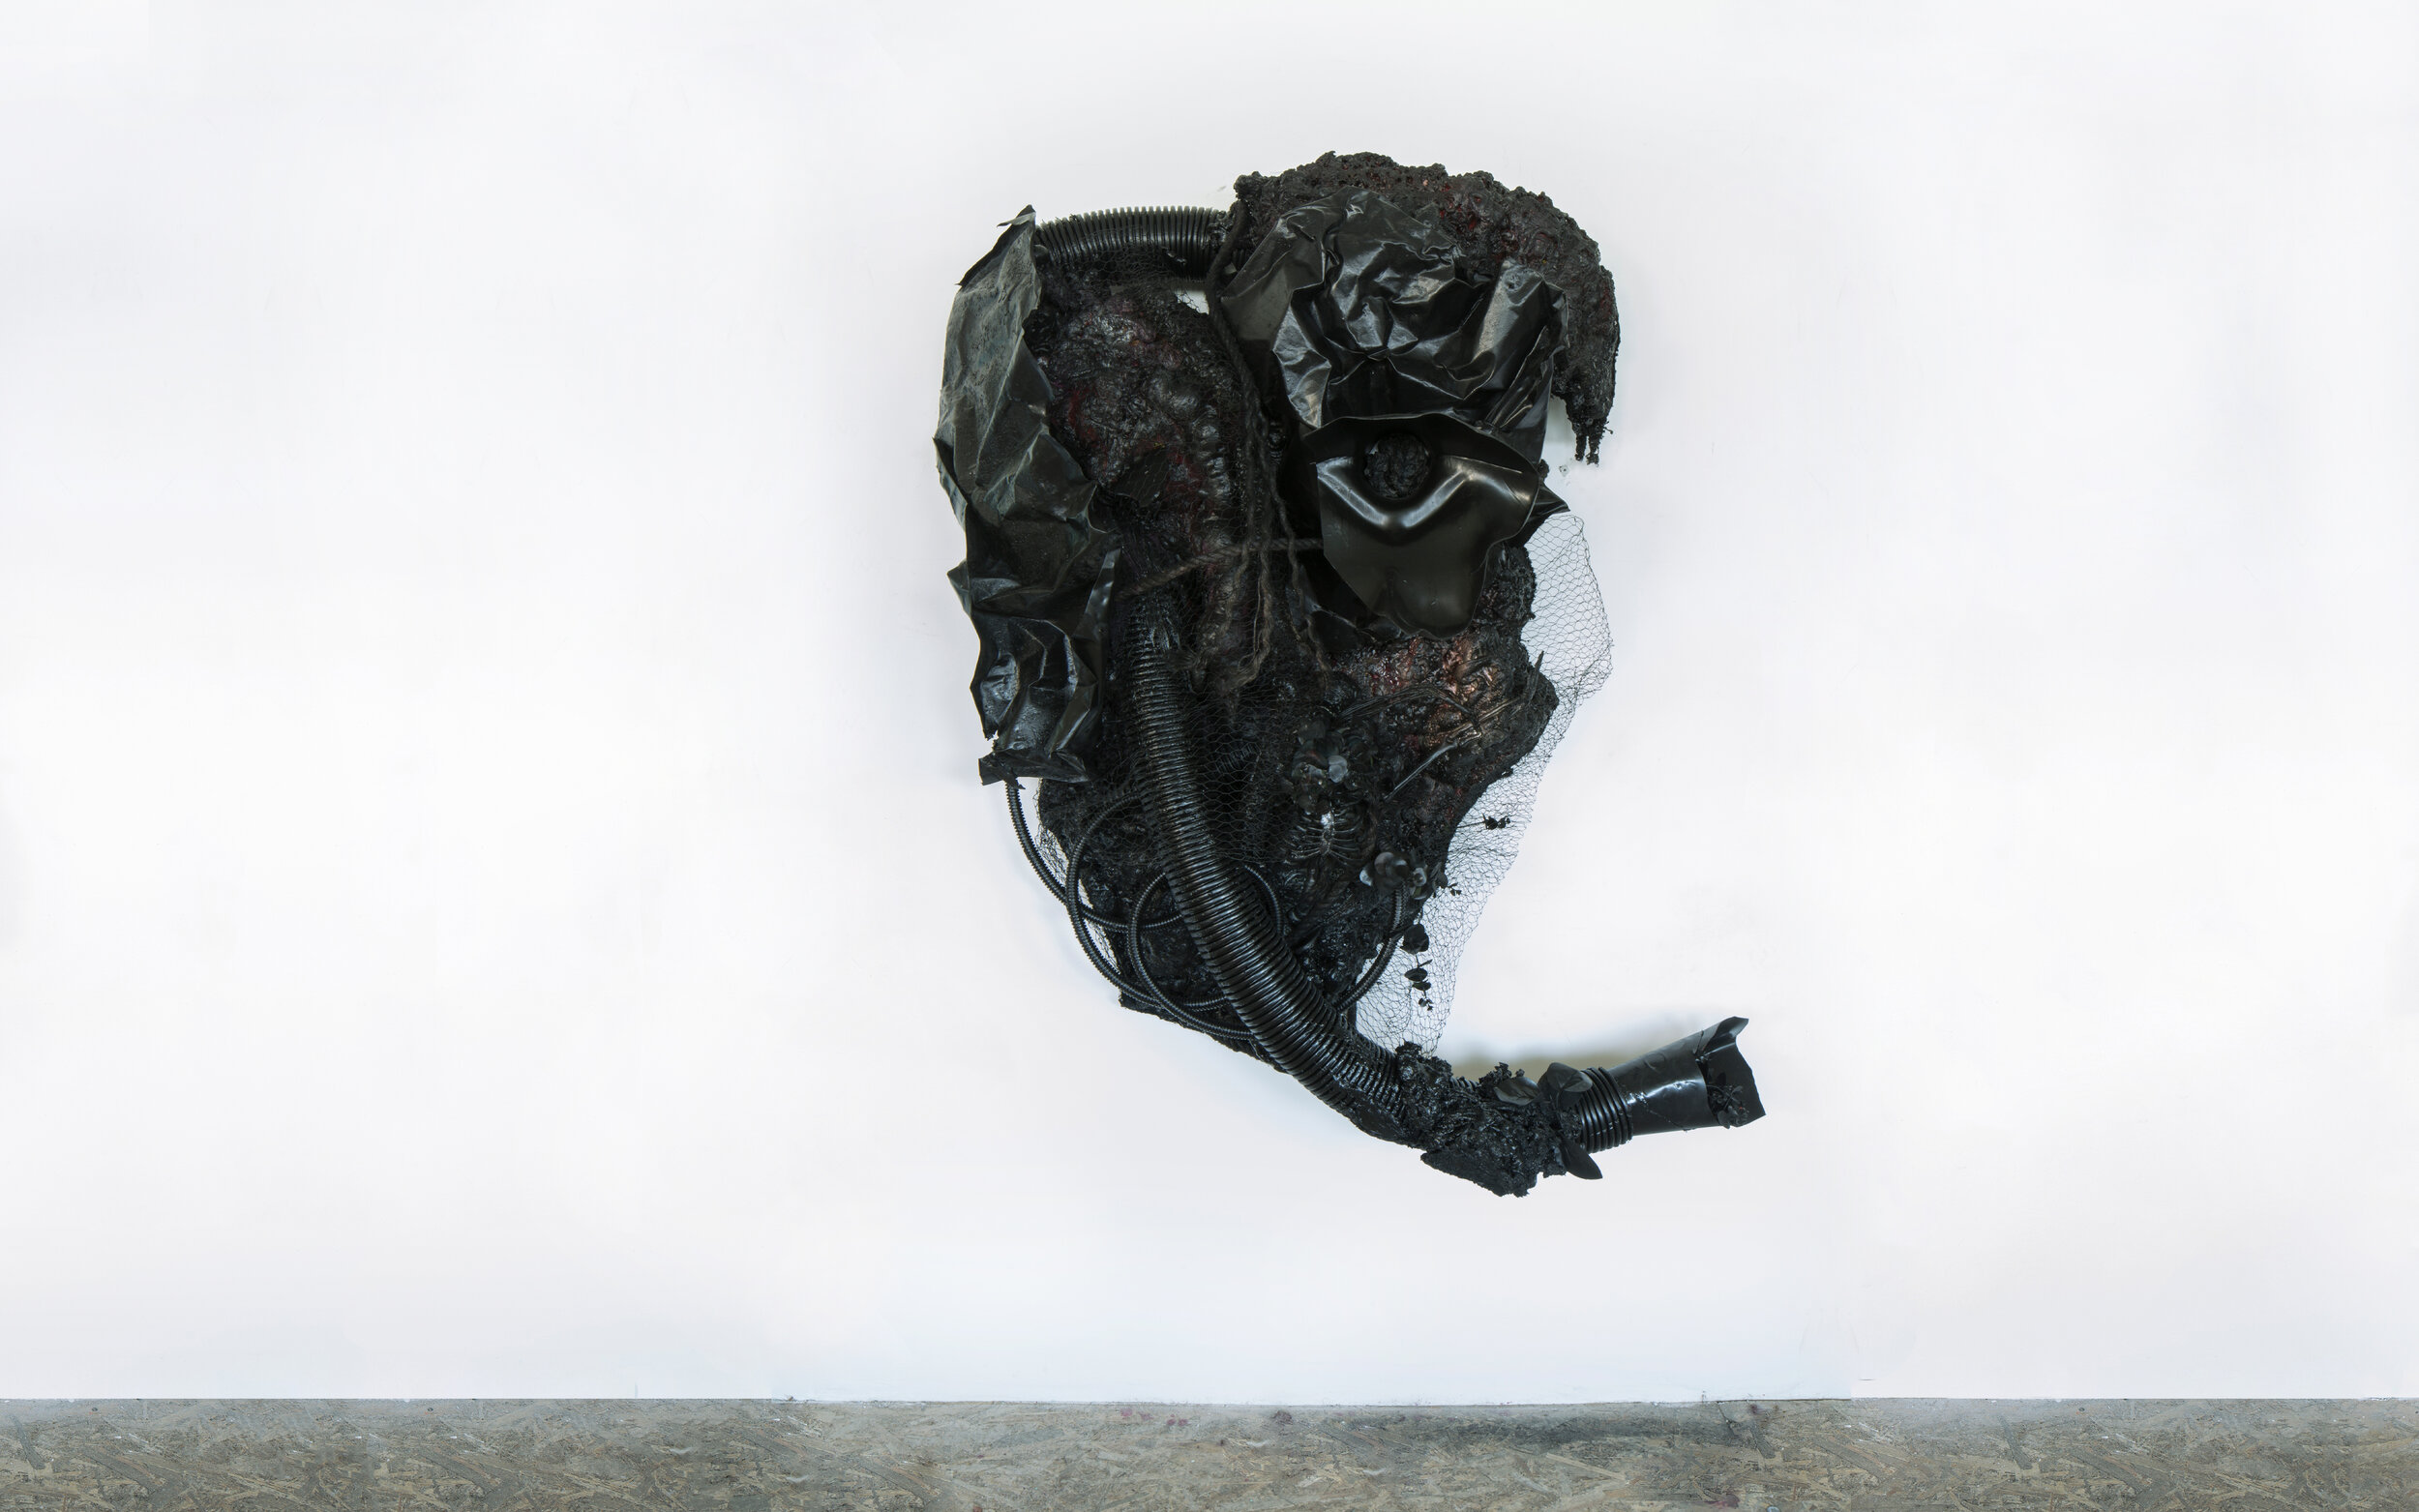  Mask, 2020, 150x130x50 cm, oil, gesso, acrylic, recycled plastic, plastic tubes, metal wire, rope, mannequin, synthetic plants, wire, metal scorpion, polyurethane foam on wood 